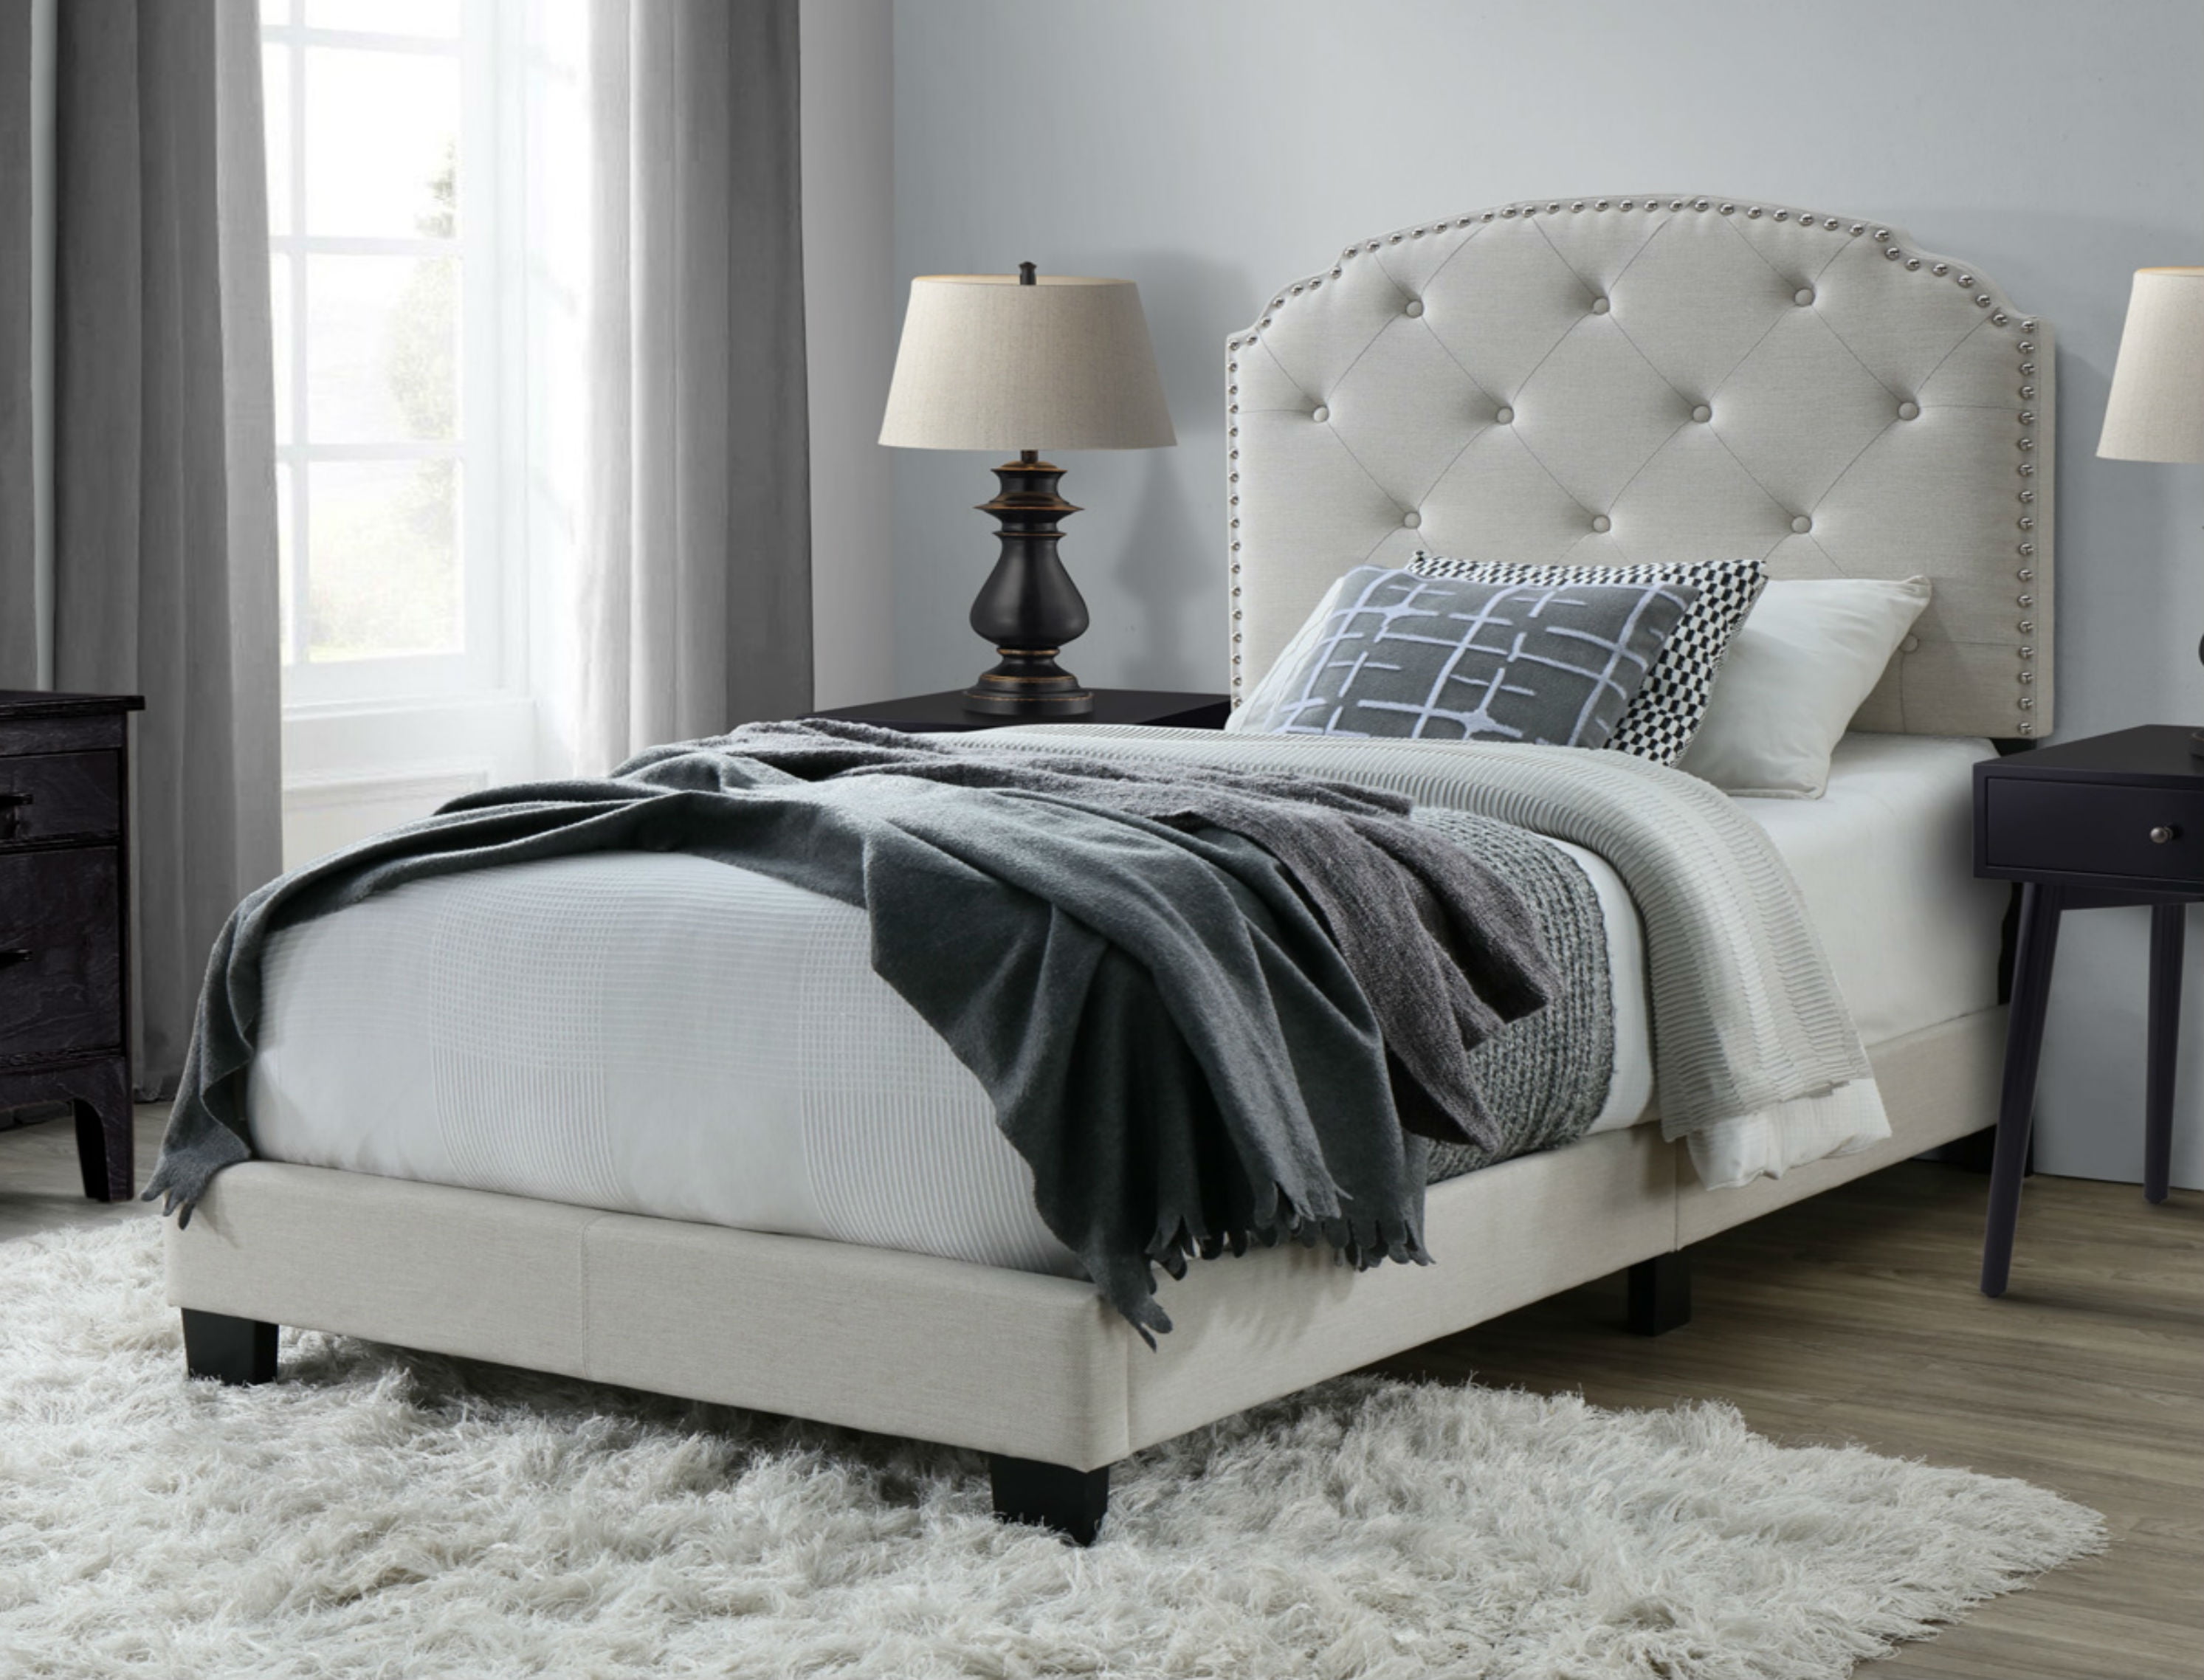 DG Casa Wembley Tufted Upholstered Panel Bed Frame with Nailhead Trim